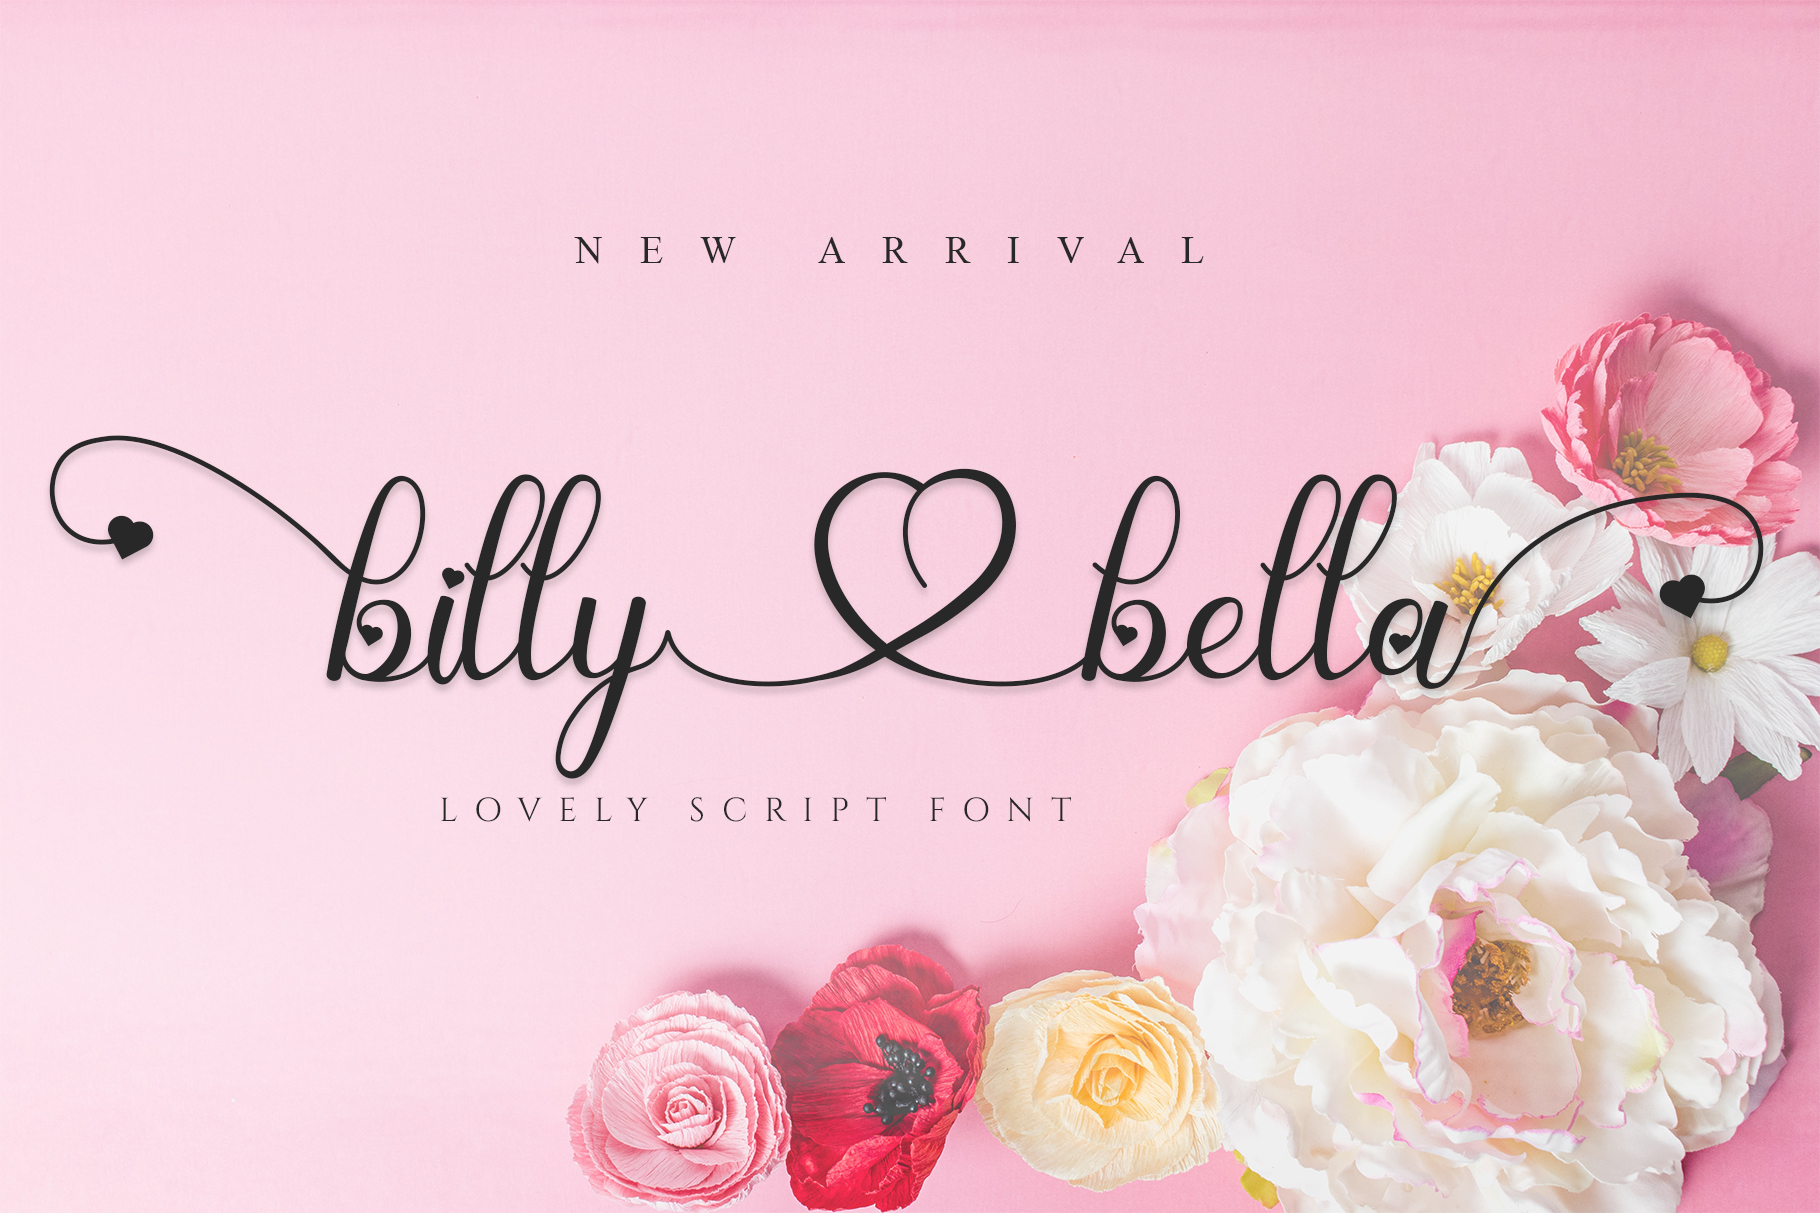 Billy Bella Calligraphy Font